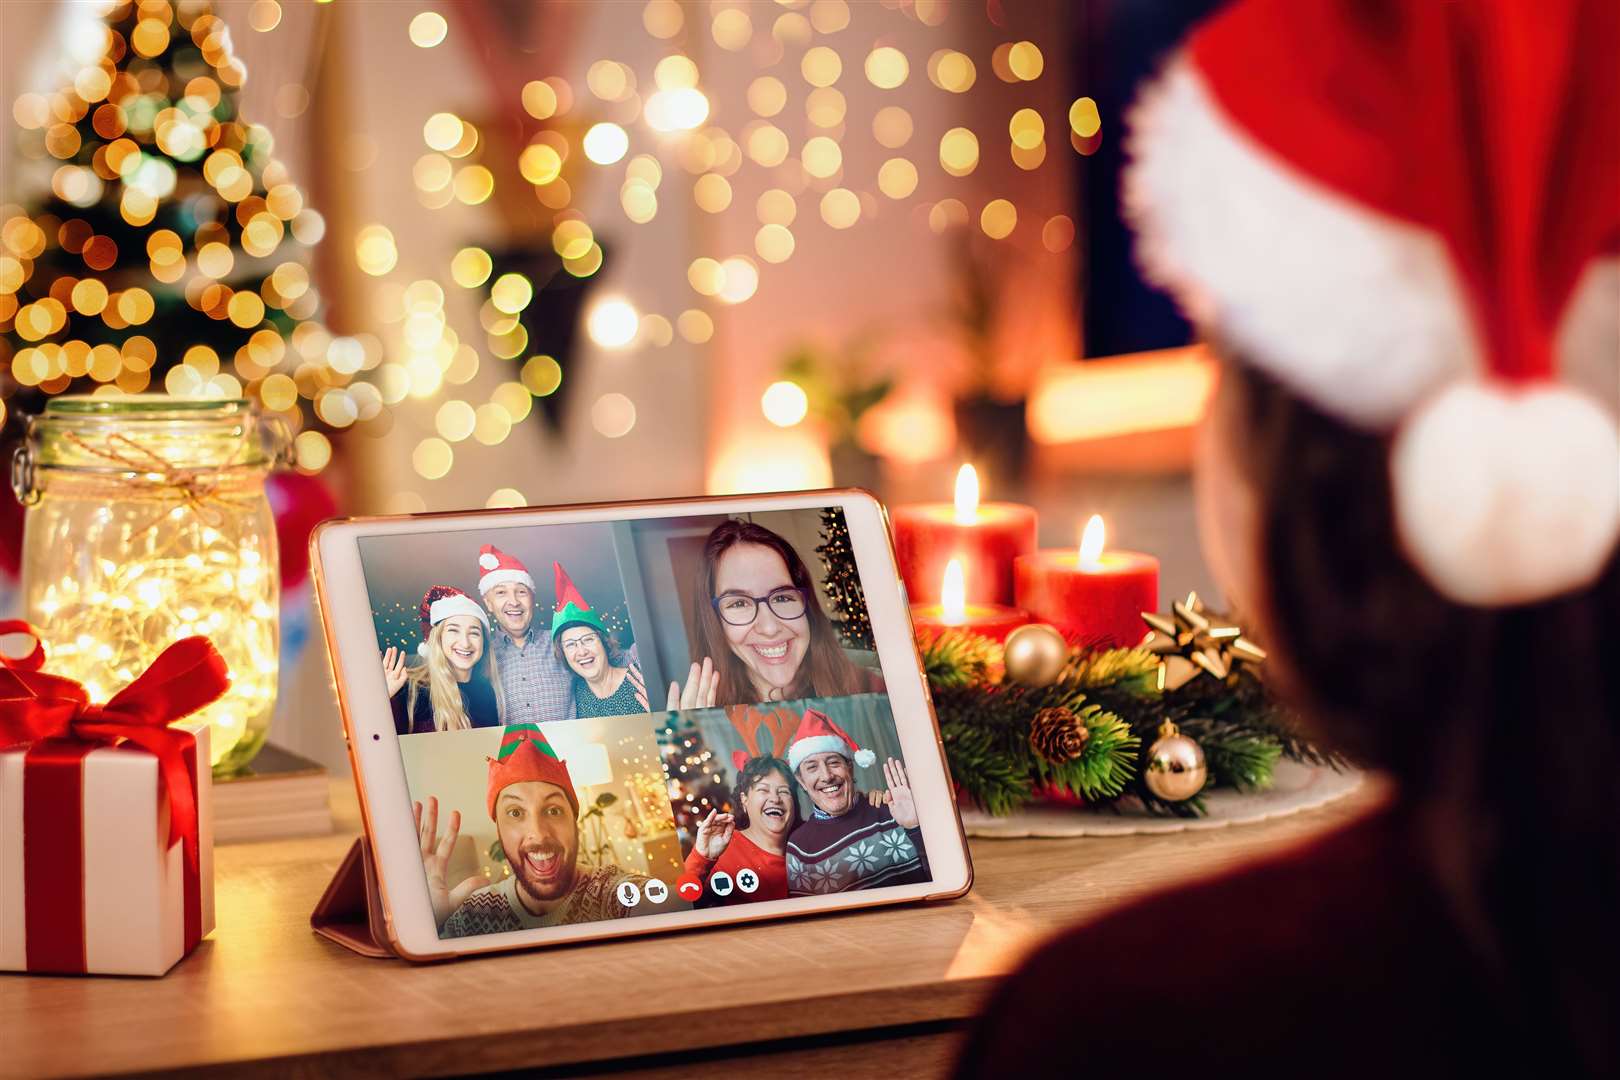 Many people will be in touch with friends and family remotely this Christmas as they follow the advice to keep interaction with other households to a minimum.